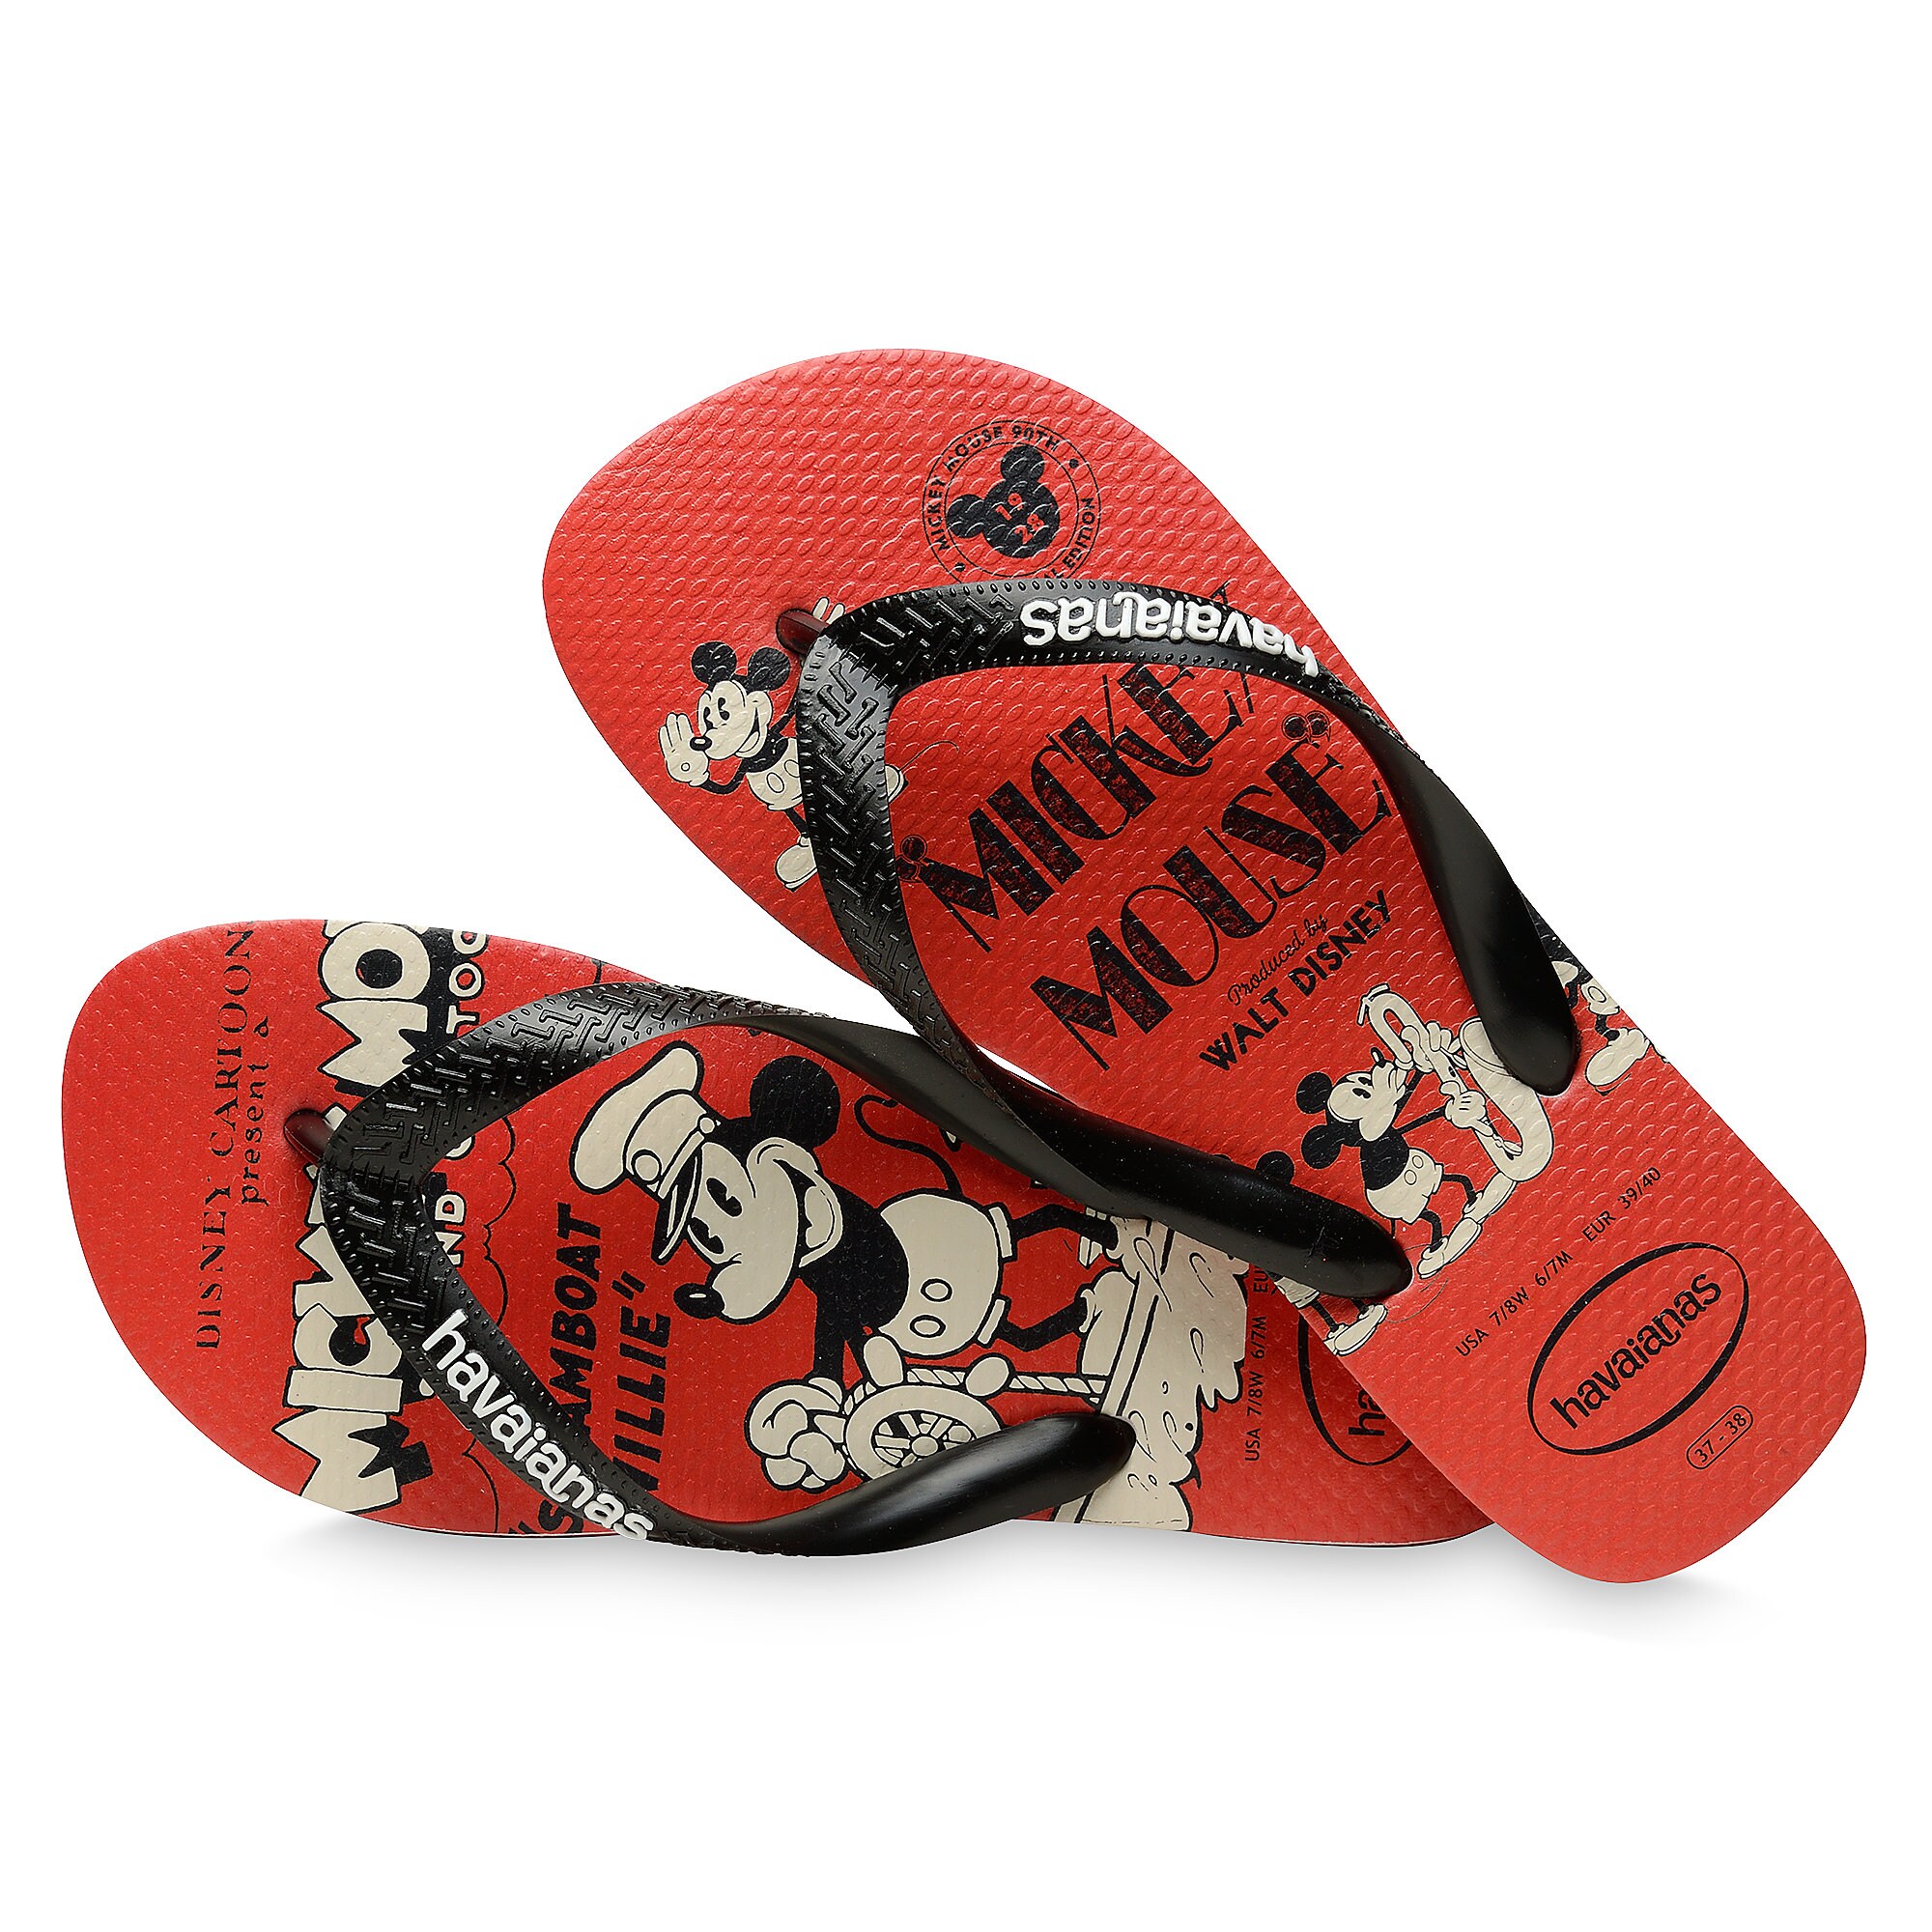 Mickey Mouse Steamboat Willie Flip Flops for Adults by Havaianas ...